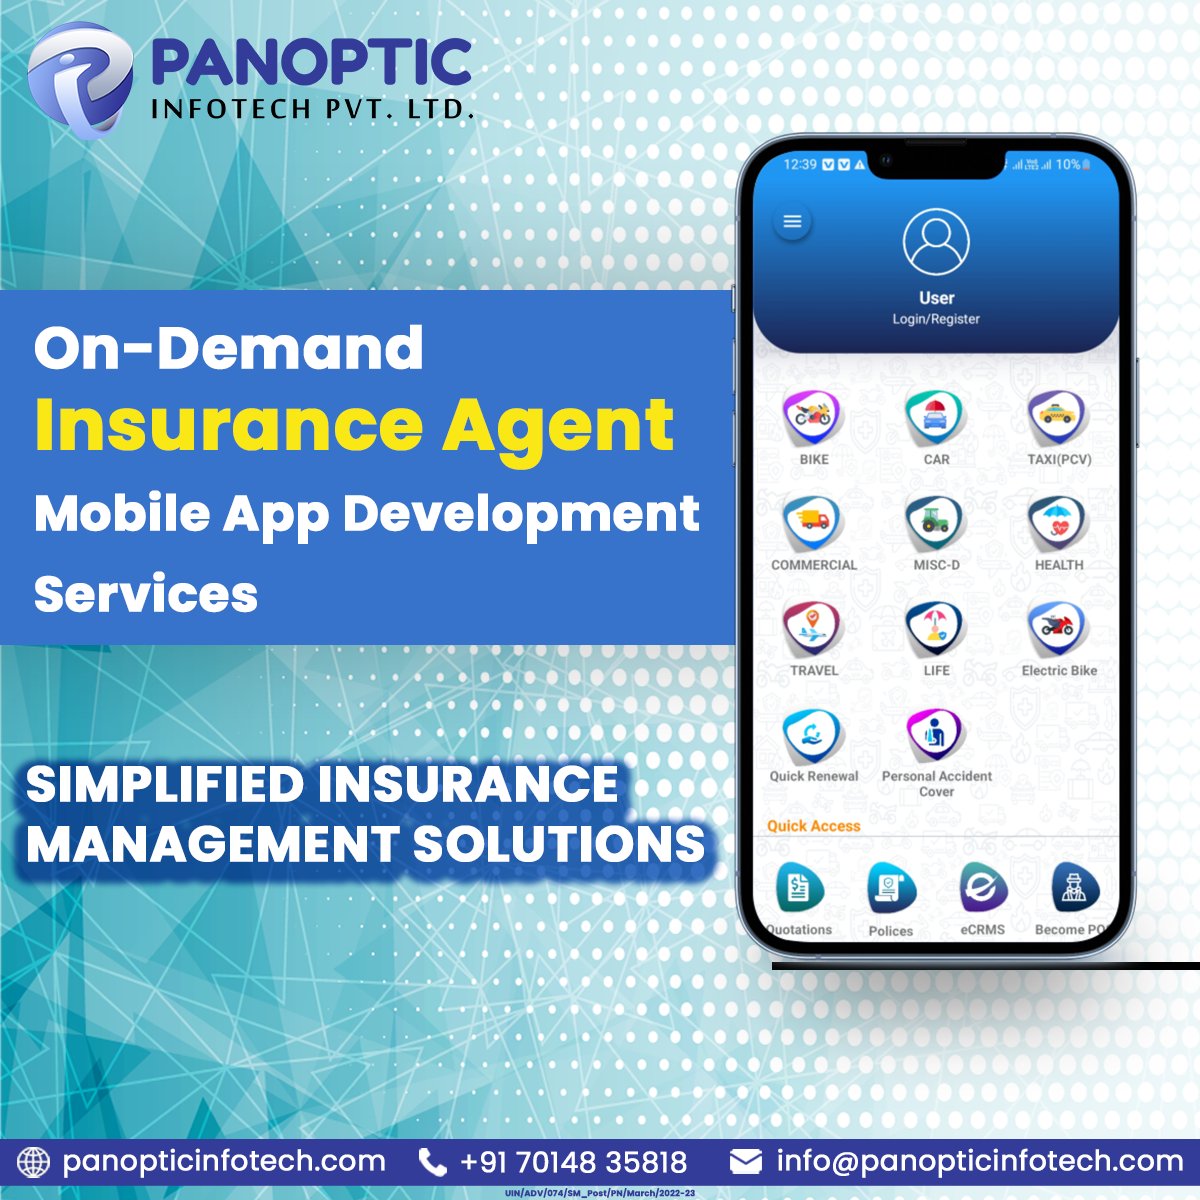 Looking for an Insurance Mobile app development company?
For More visit - panopticinfotech.com
#panopticinfotech #softwaredevelopment #mobileappdevelopment #mobile #InsuranceApp #CRM #development #insurance